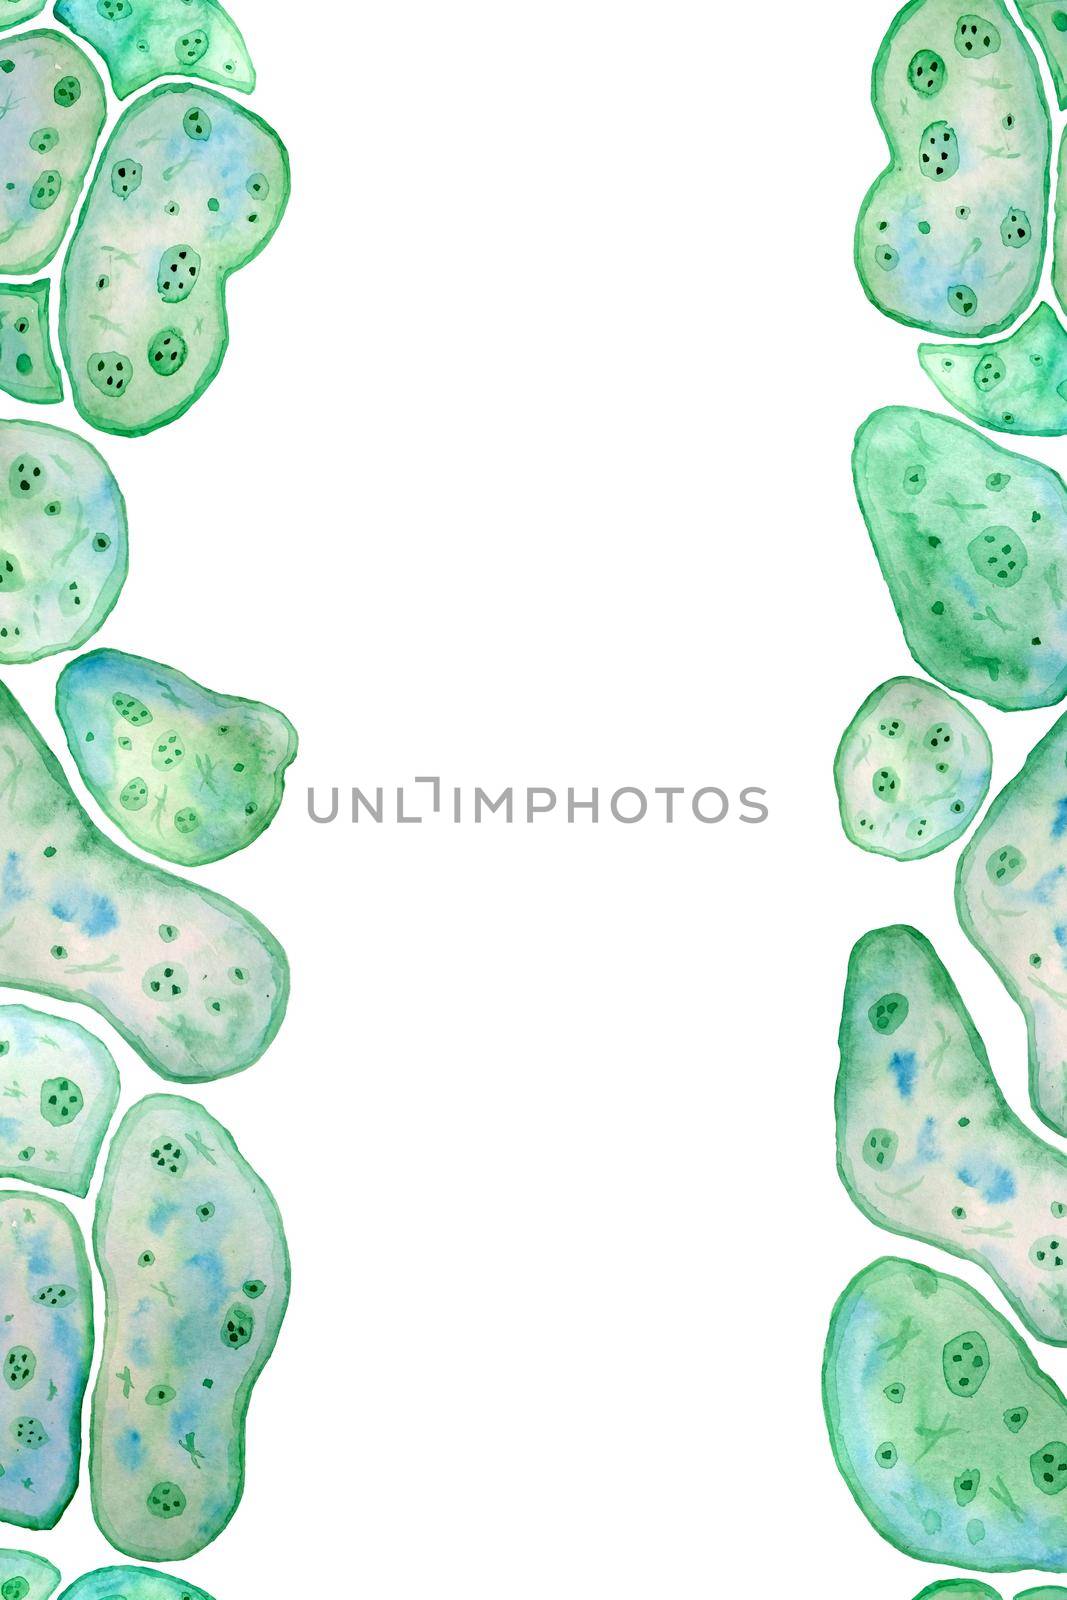 Seamless vertical border frame of unicellular green blue algae chlorella spirulina with large cells single-cells with lipid weed droplets. Watercolor illustration of macro zoom microorganism bacteria cosmetics biological design. by Lagmar